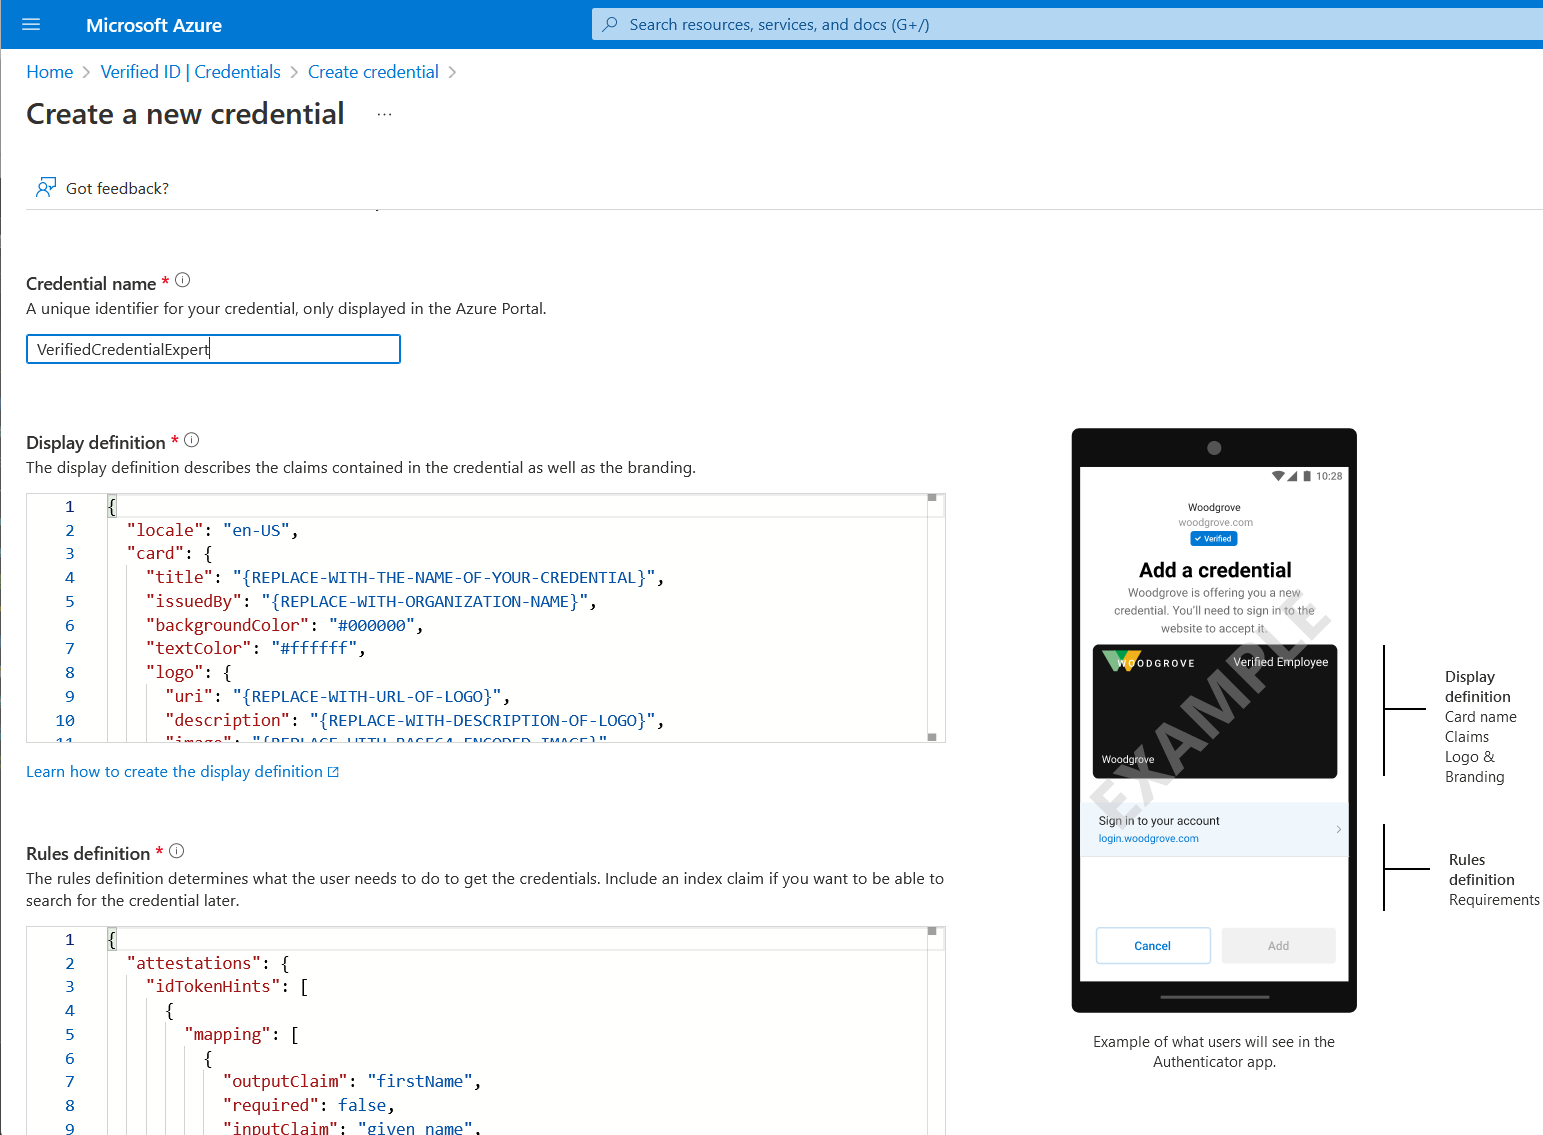 Screenshot of the "Create a new credential" page, displaying JSON samples for the rules and display files.